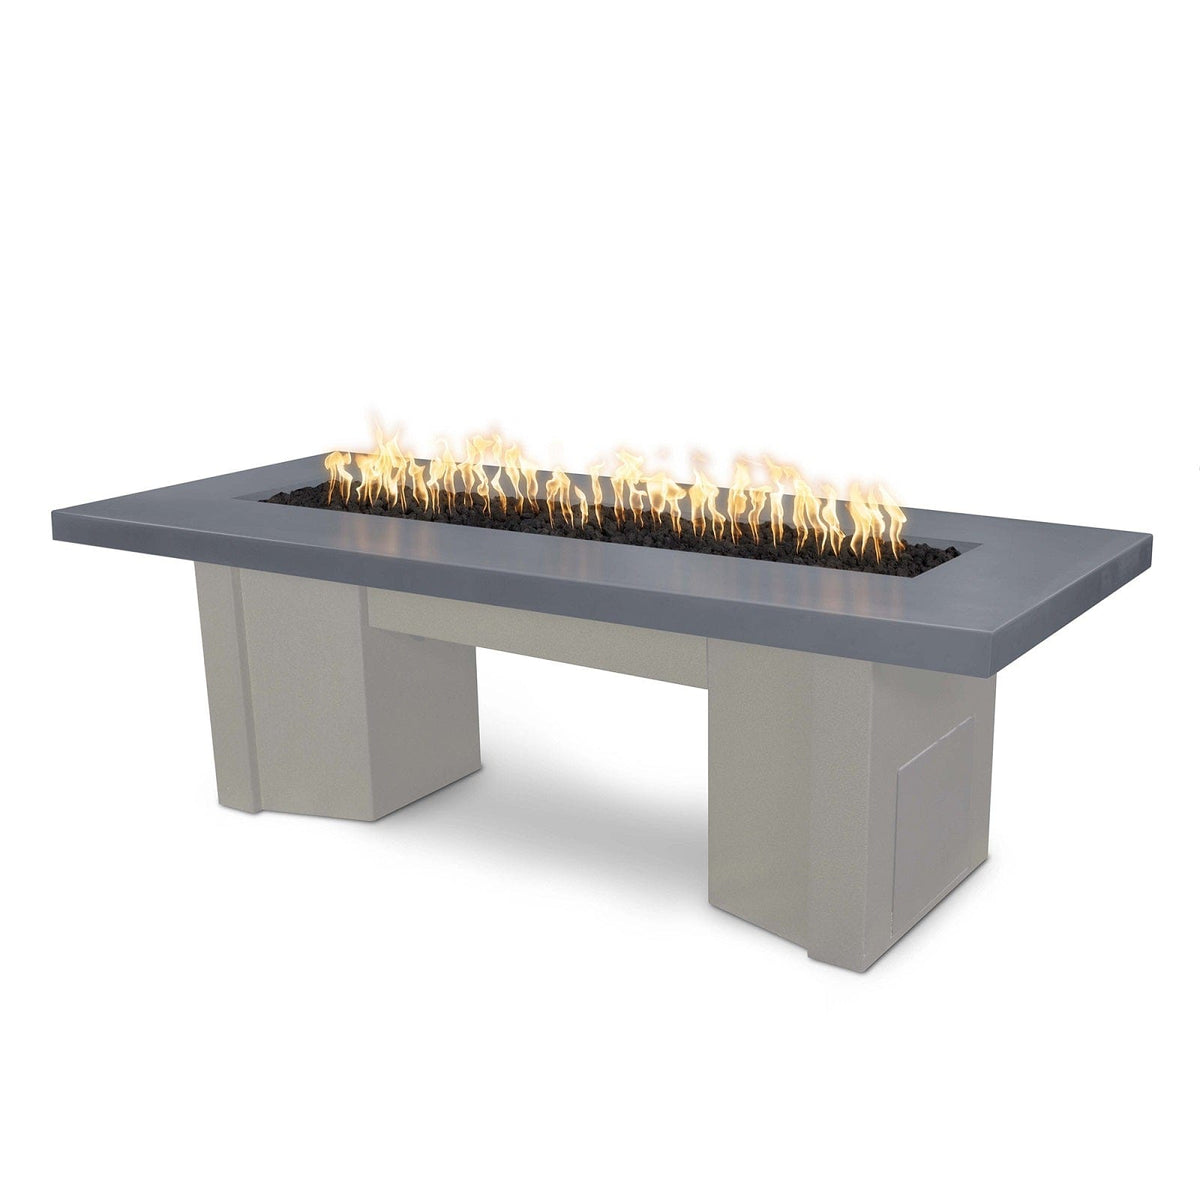 The Outdoor Plus Fire Features Gray (-GRY) / Pewter Powder Coated Steel (-PEW) The Outdoor Plus 78&quot; Alameda Fire Table Smooth Concrete in Natural Gas - 110V Plug &amp; Play Electronic Ignition / OPT-ALMGFRC78EKIT-NG